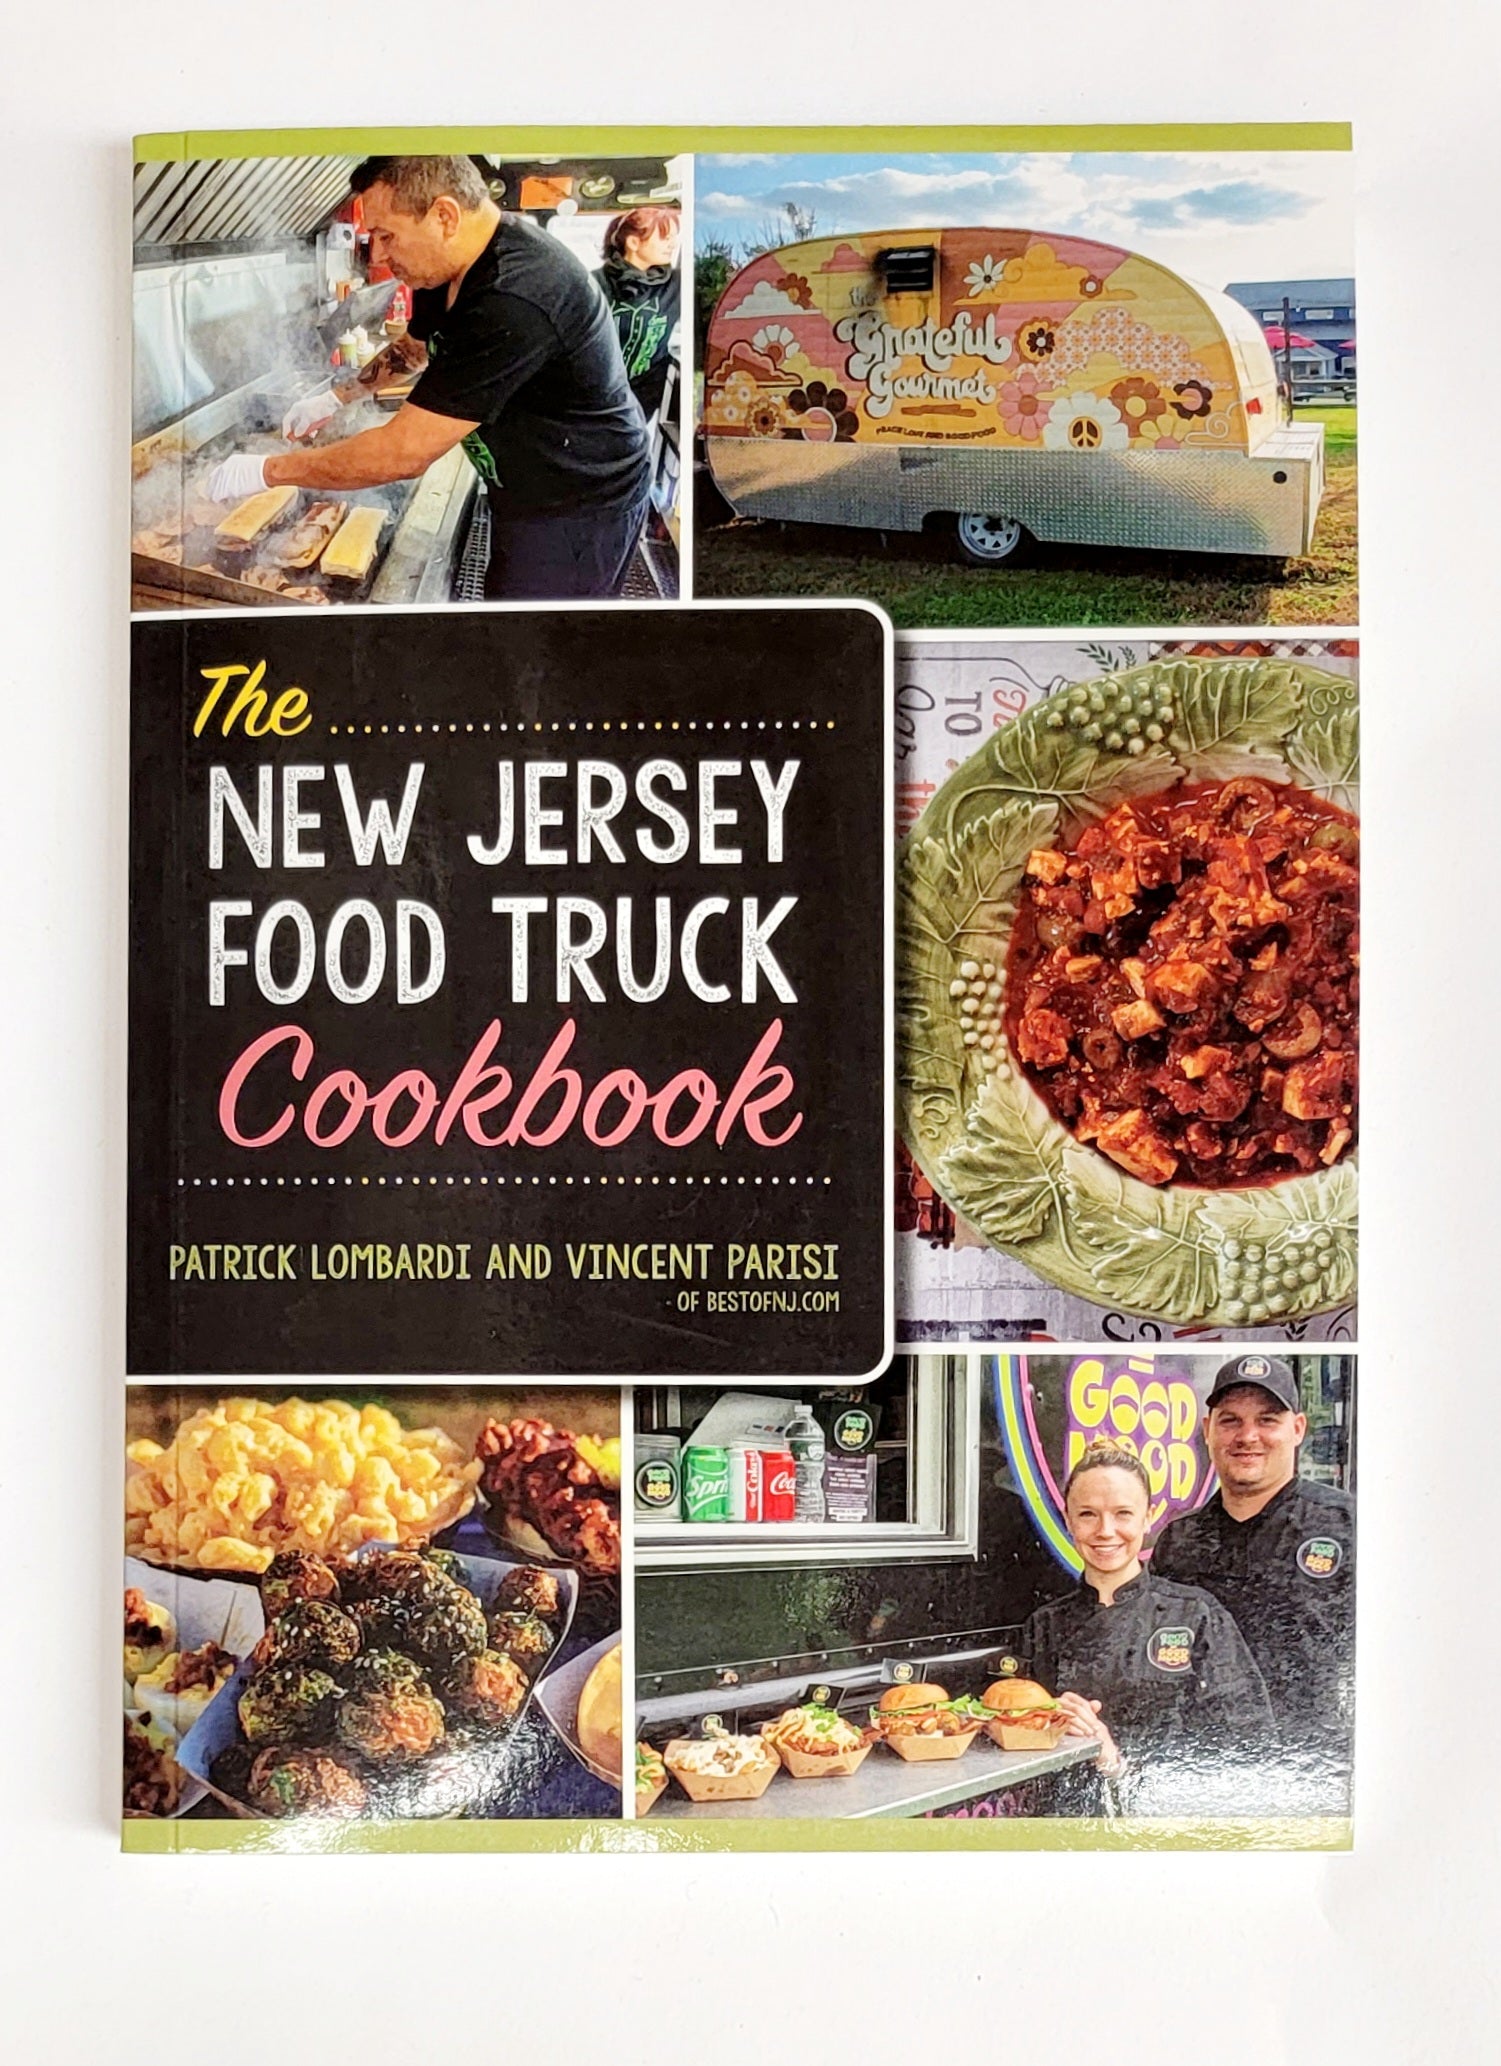 The New Jersey Food Truck Cookbook